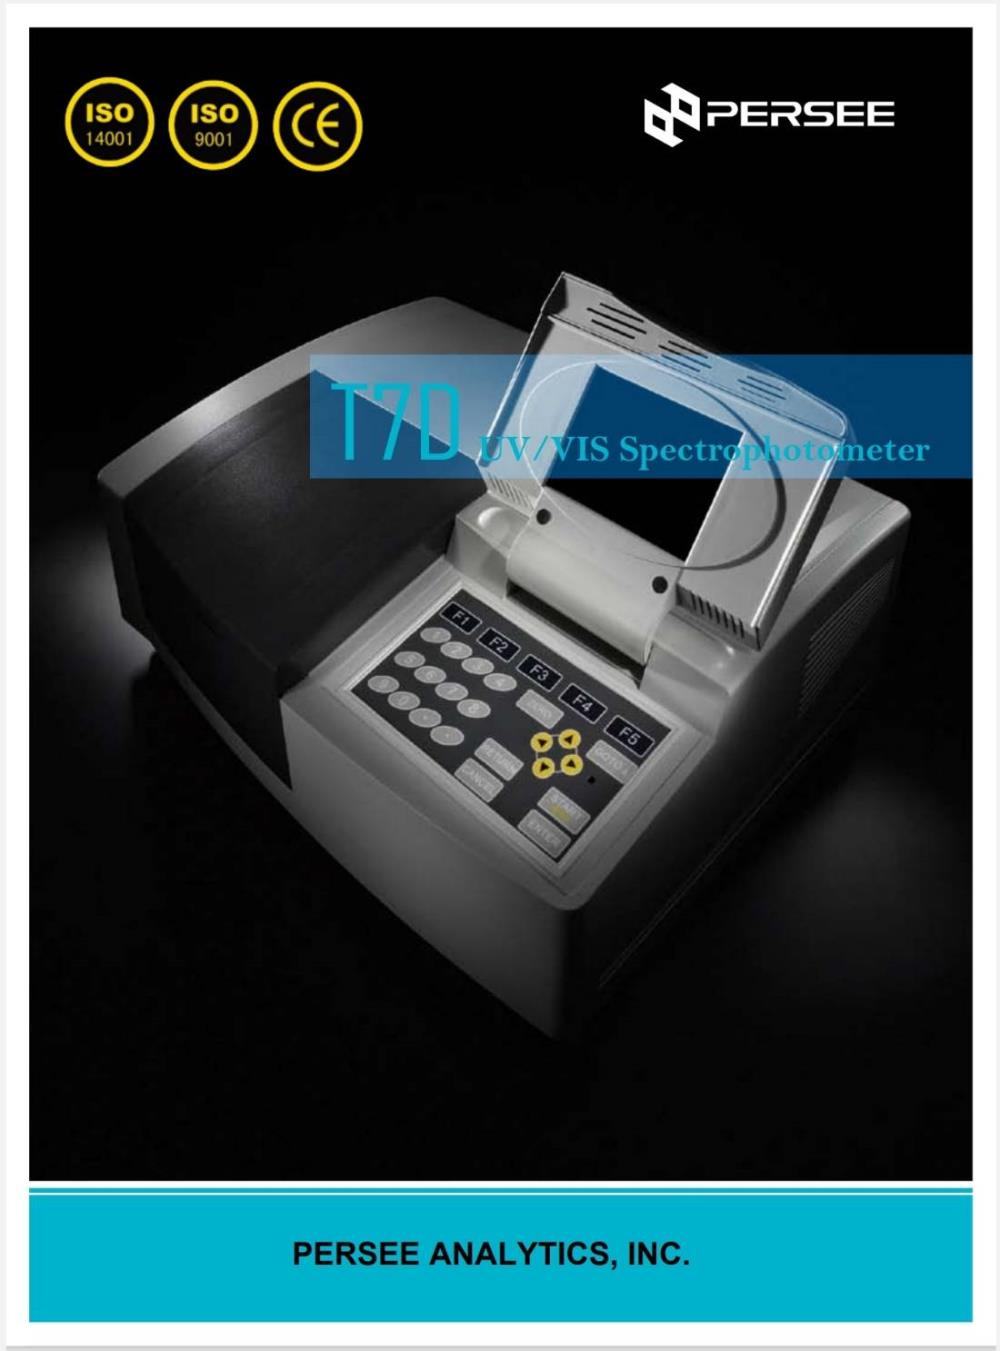 Spectrophotometer T7D/T7DS Double Beam UV-Vis,Spectrophotometer,UV-Vis Spectrometer,Double Beam,เครื่องดูดกลืนแสง,สเปกโทรมิเตอร์,PERSEE,Energy and Environment/Others